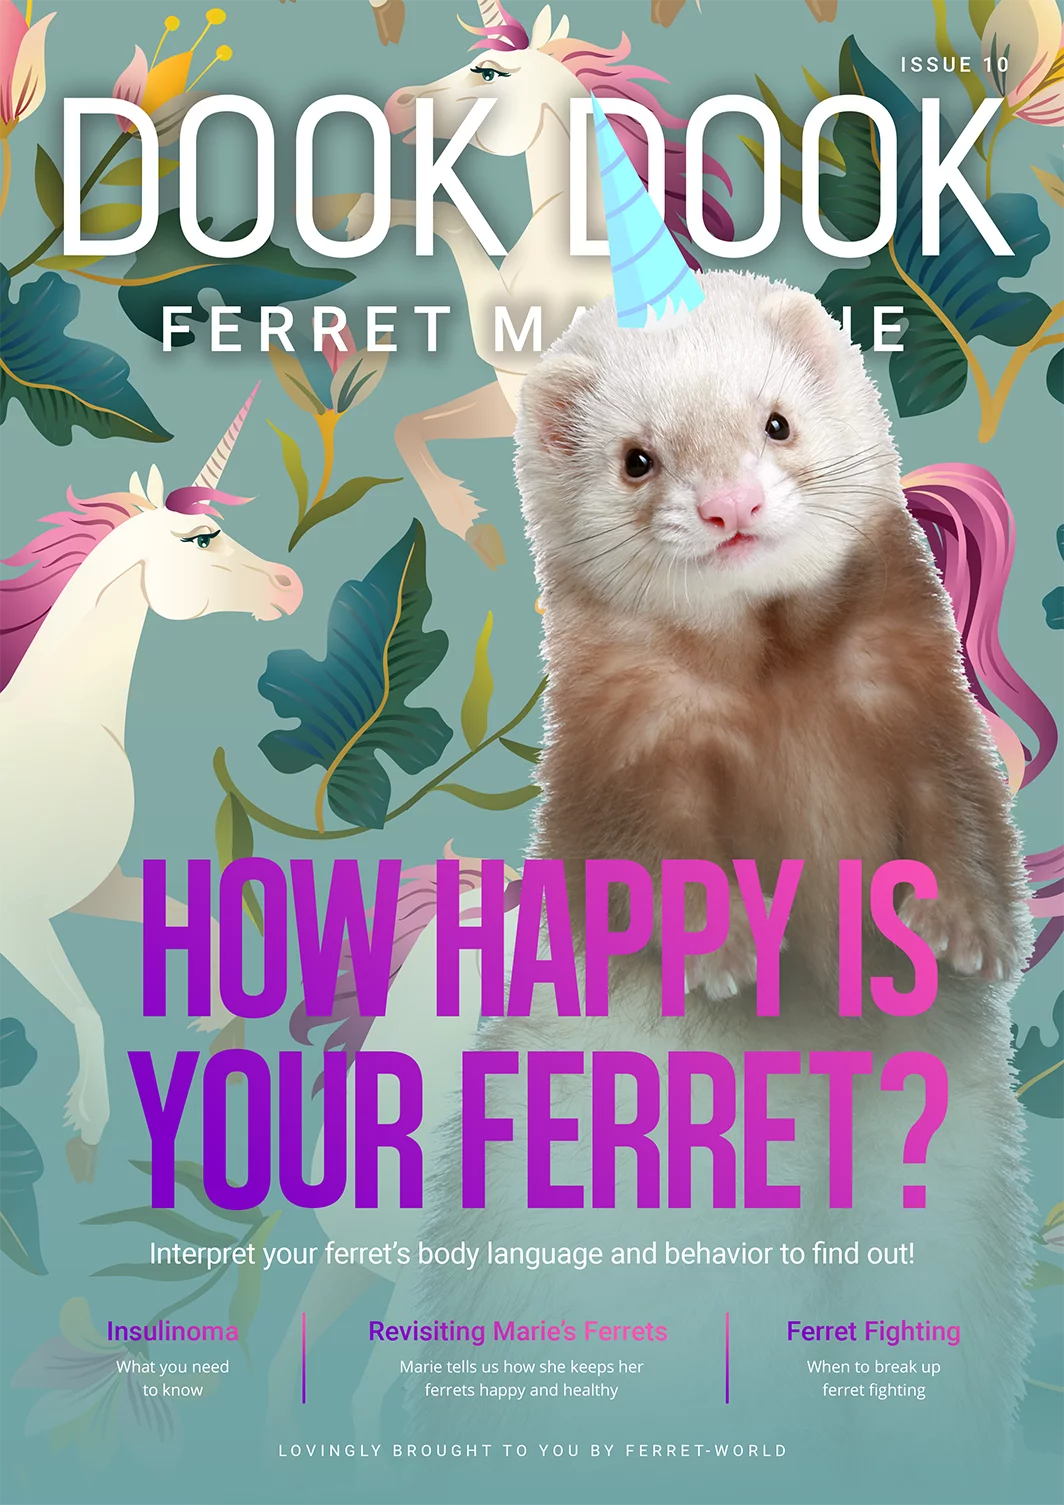 Superpowered Ferret Fighters — I made a mockup cover for a story I